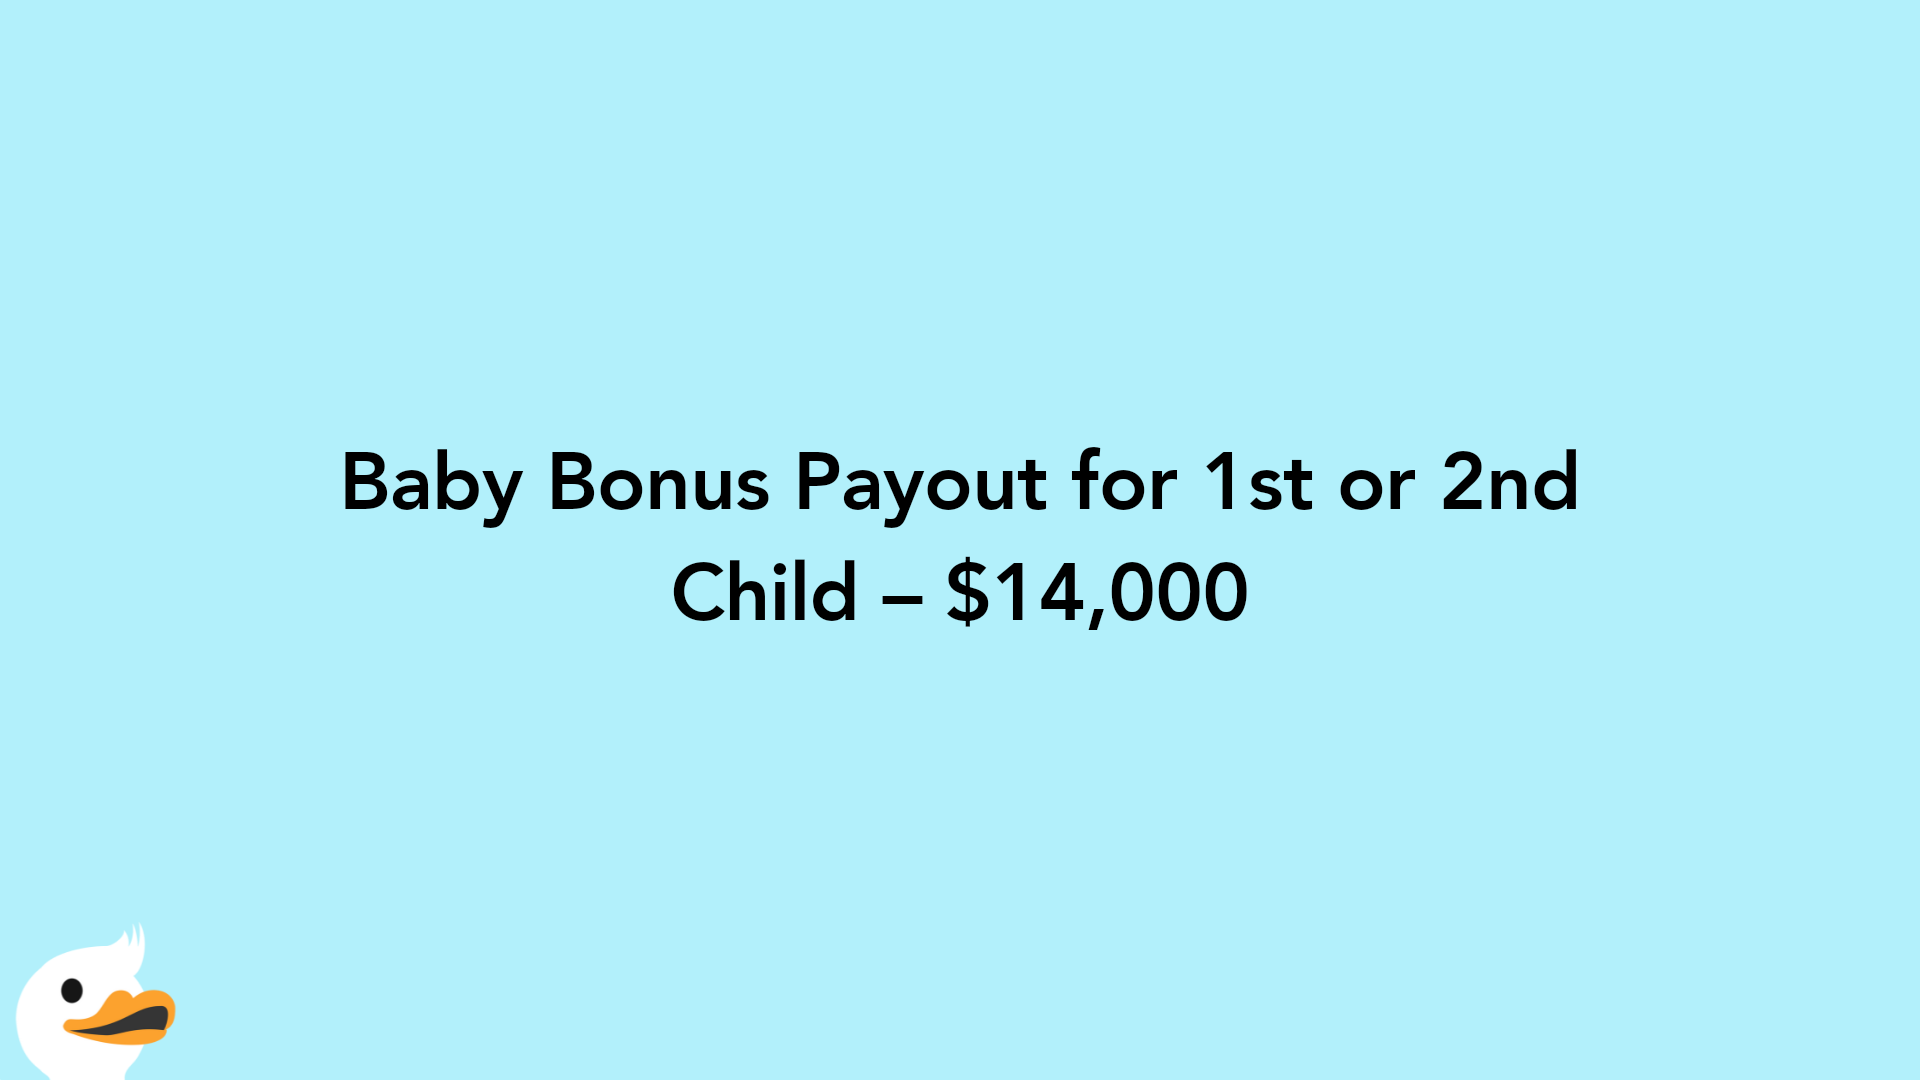 Baby Bonus Payout for 1st or 2nd Child – $14,000